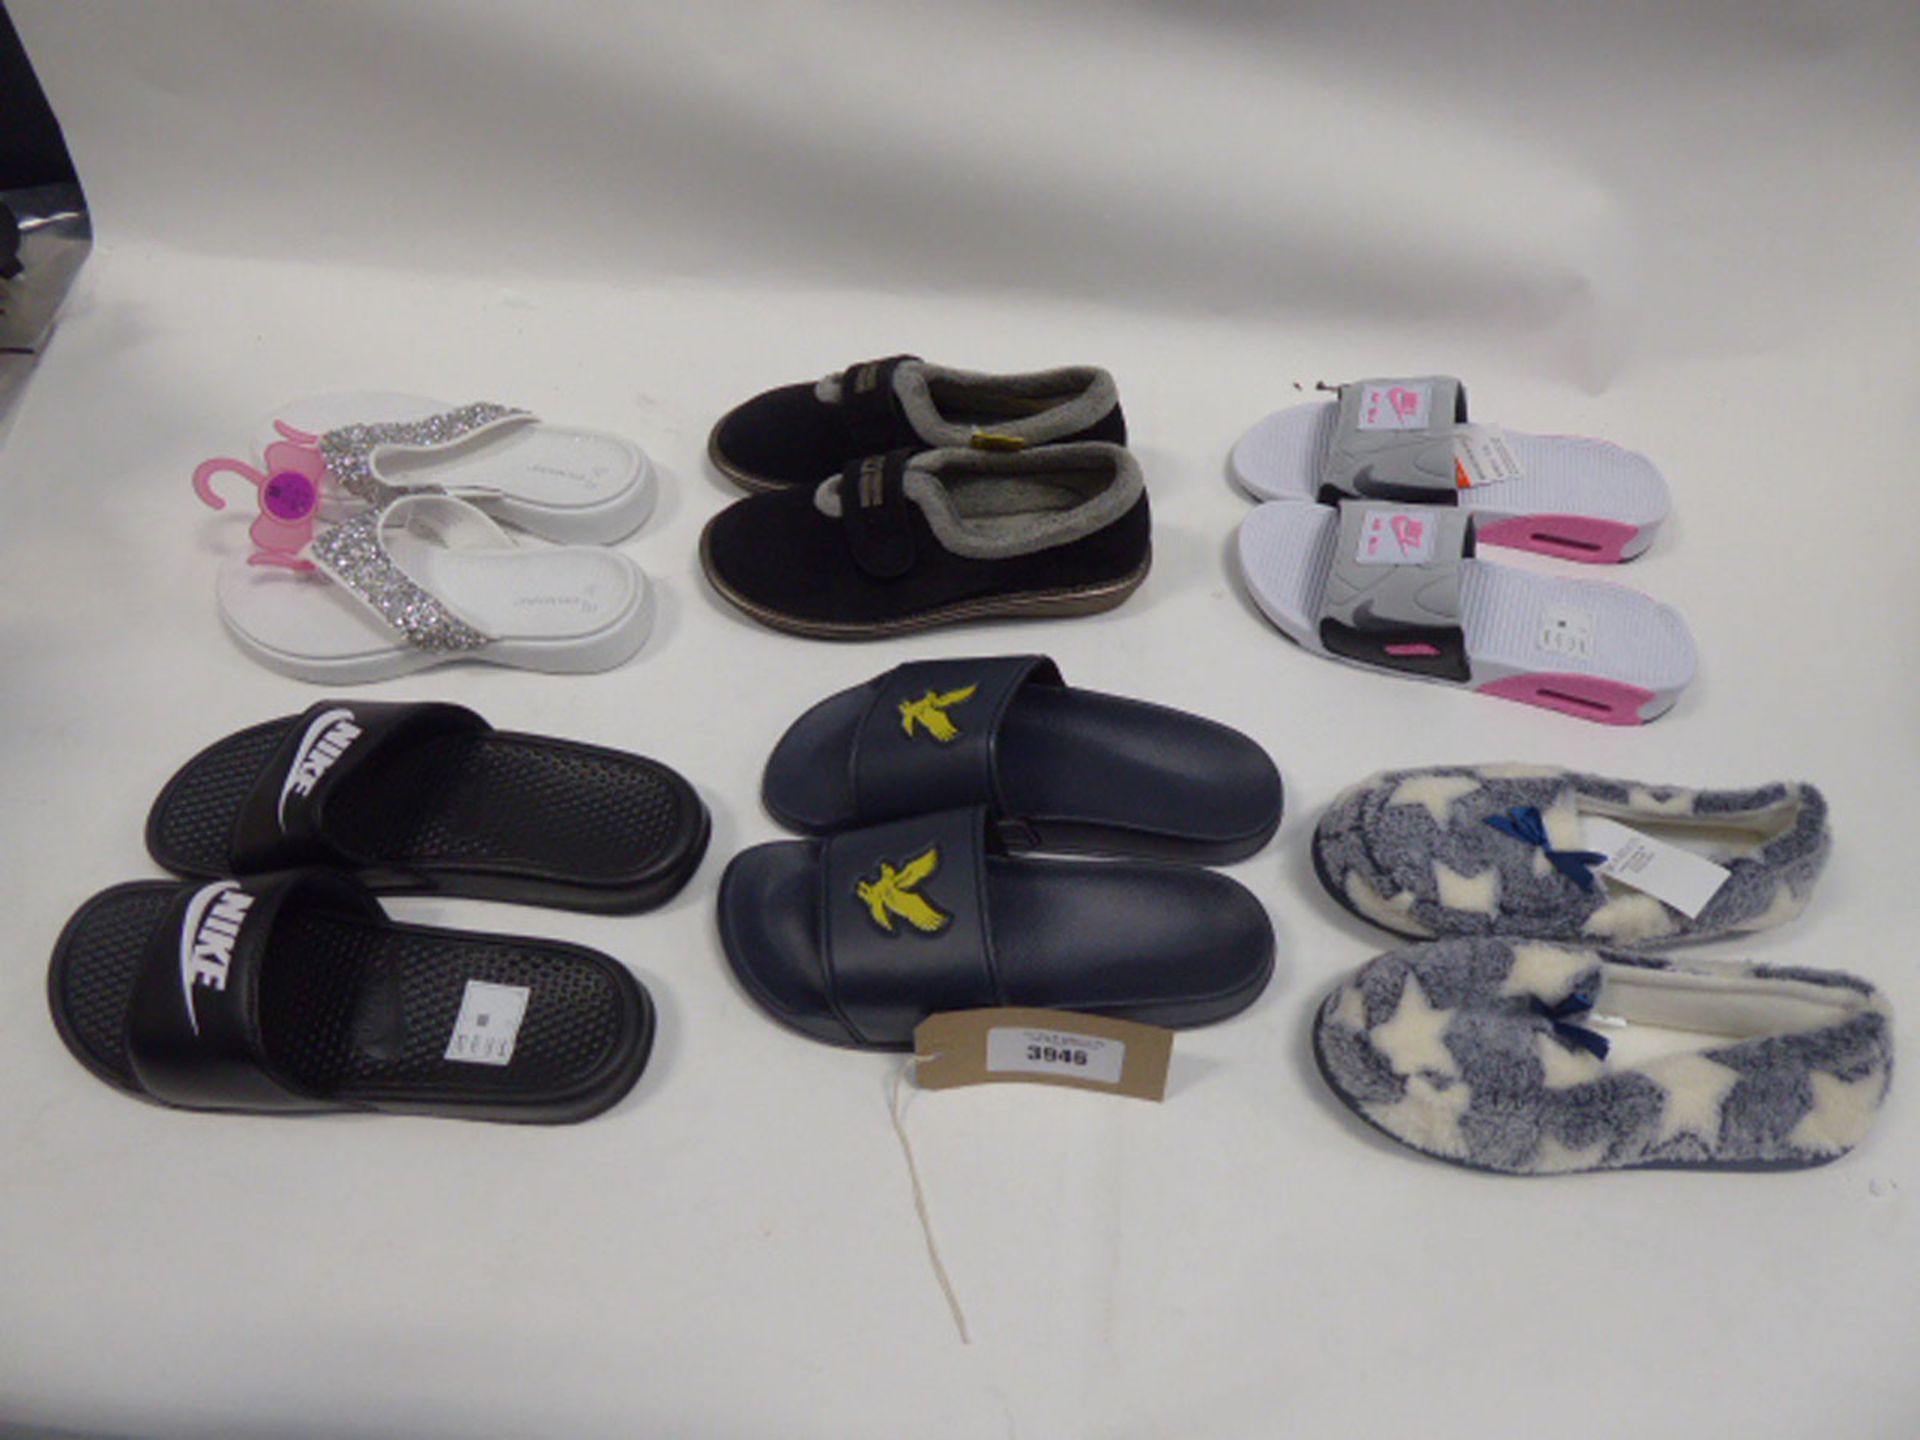 Bag of assorted slippers, sandals and walking shoes